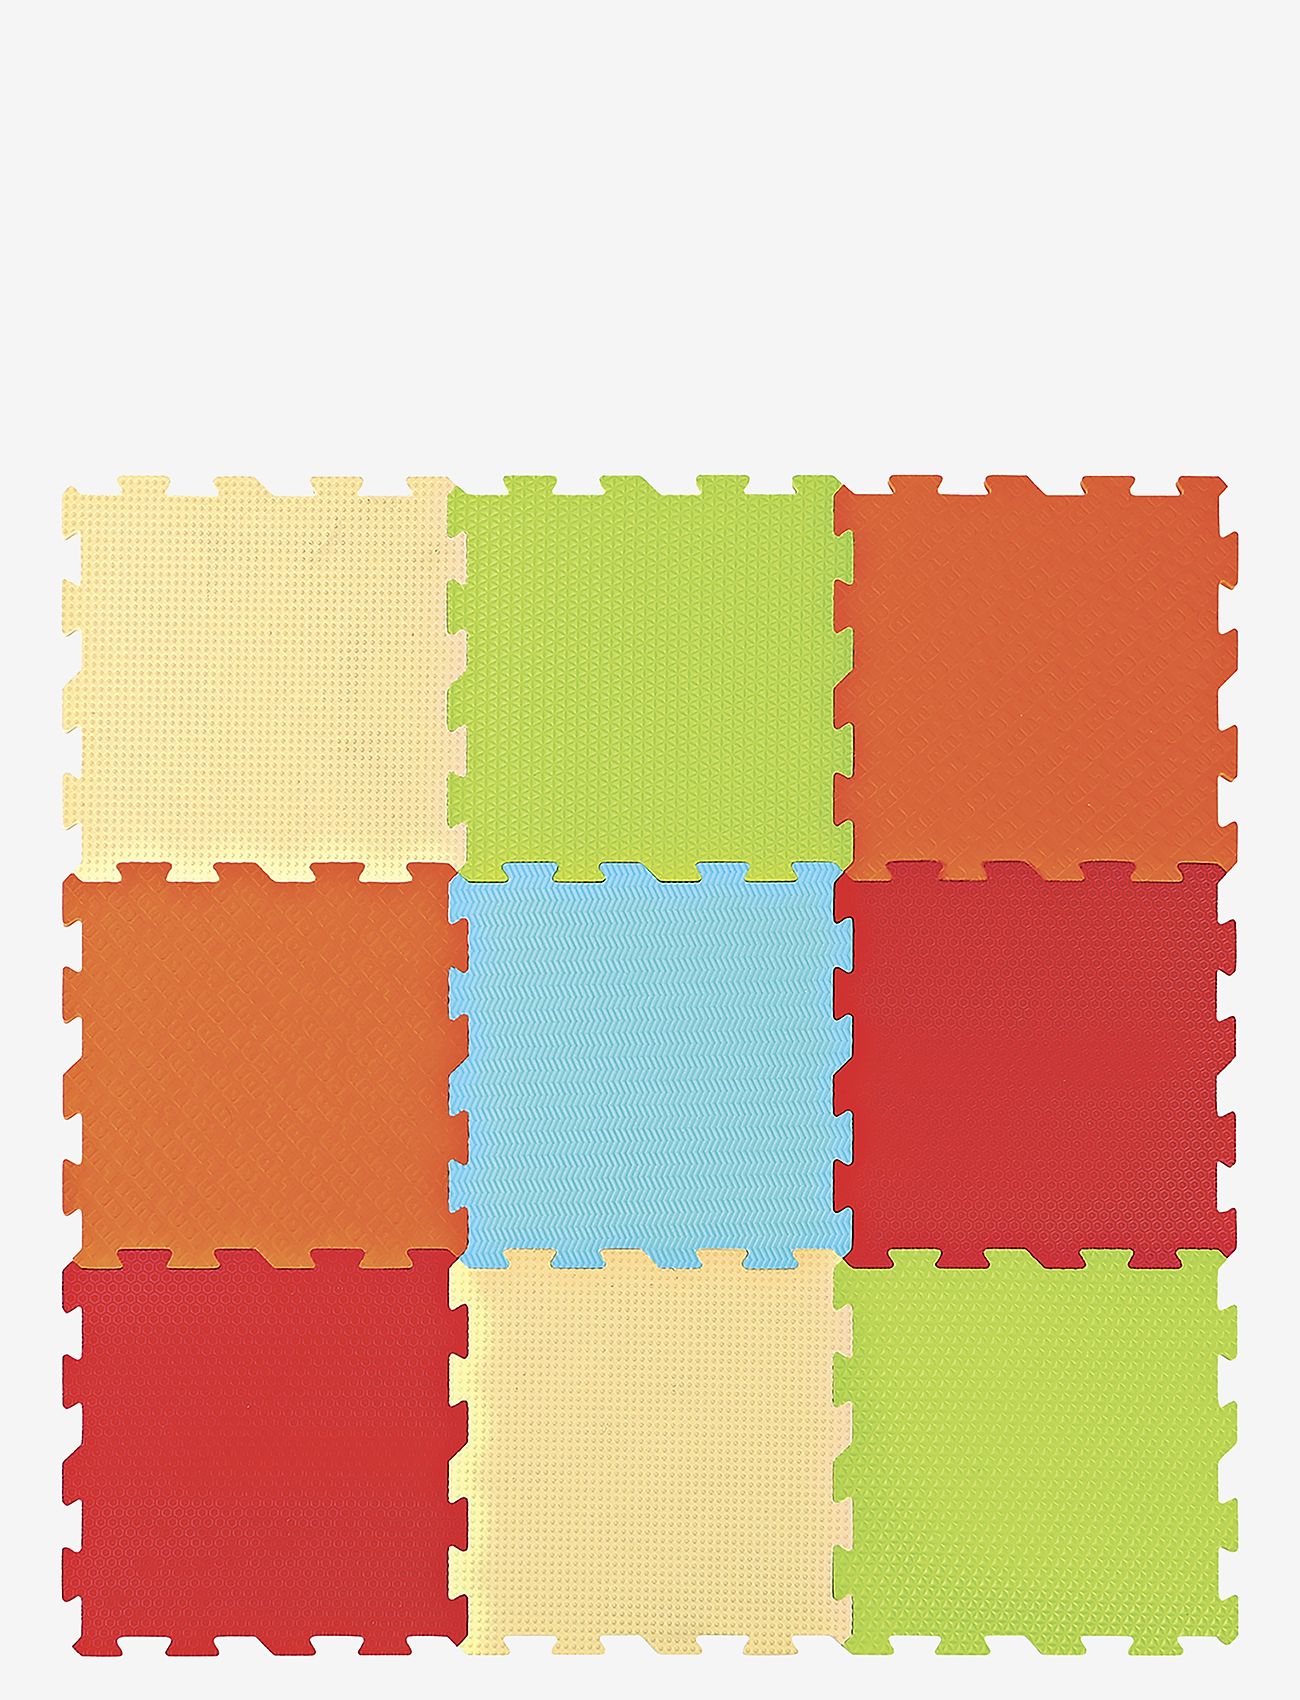 Ludi - Play mat with colors - legemåtter - multicolor - 0